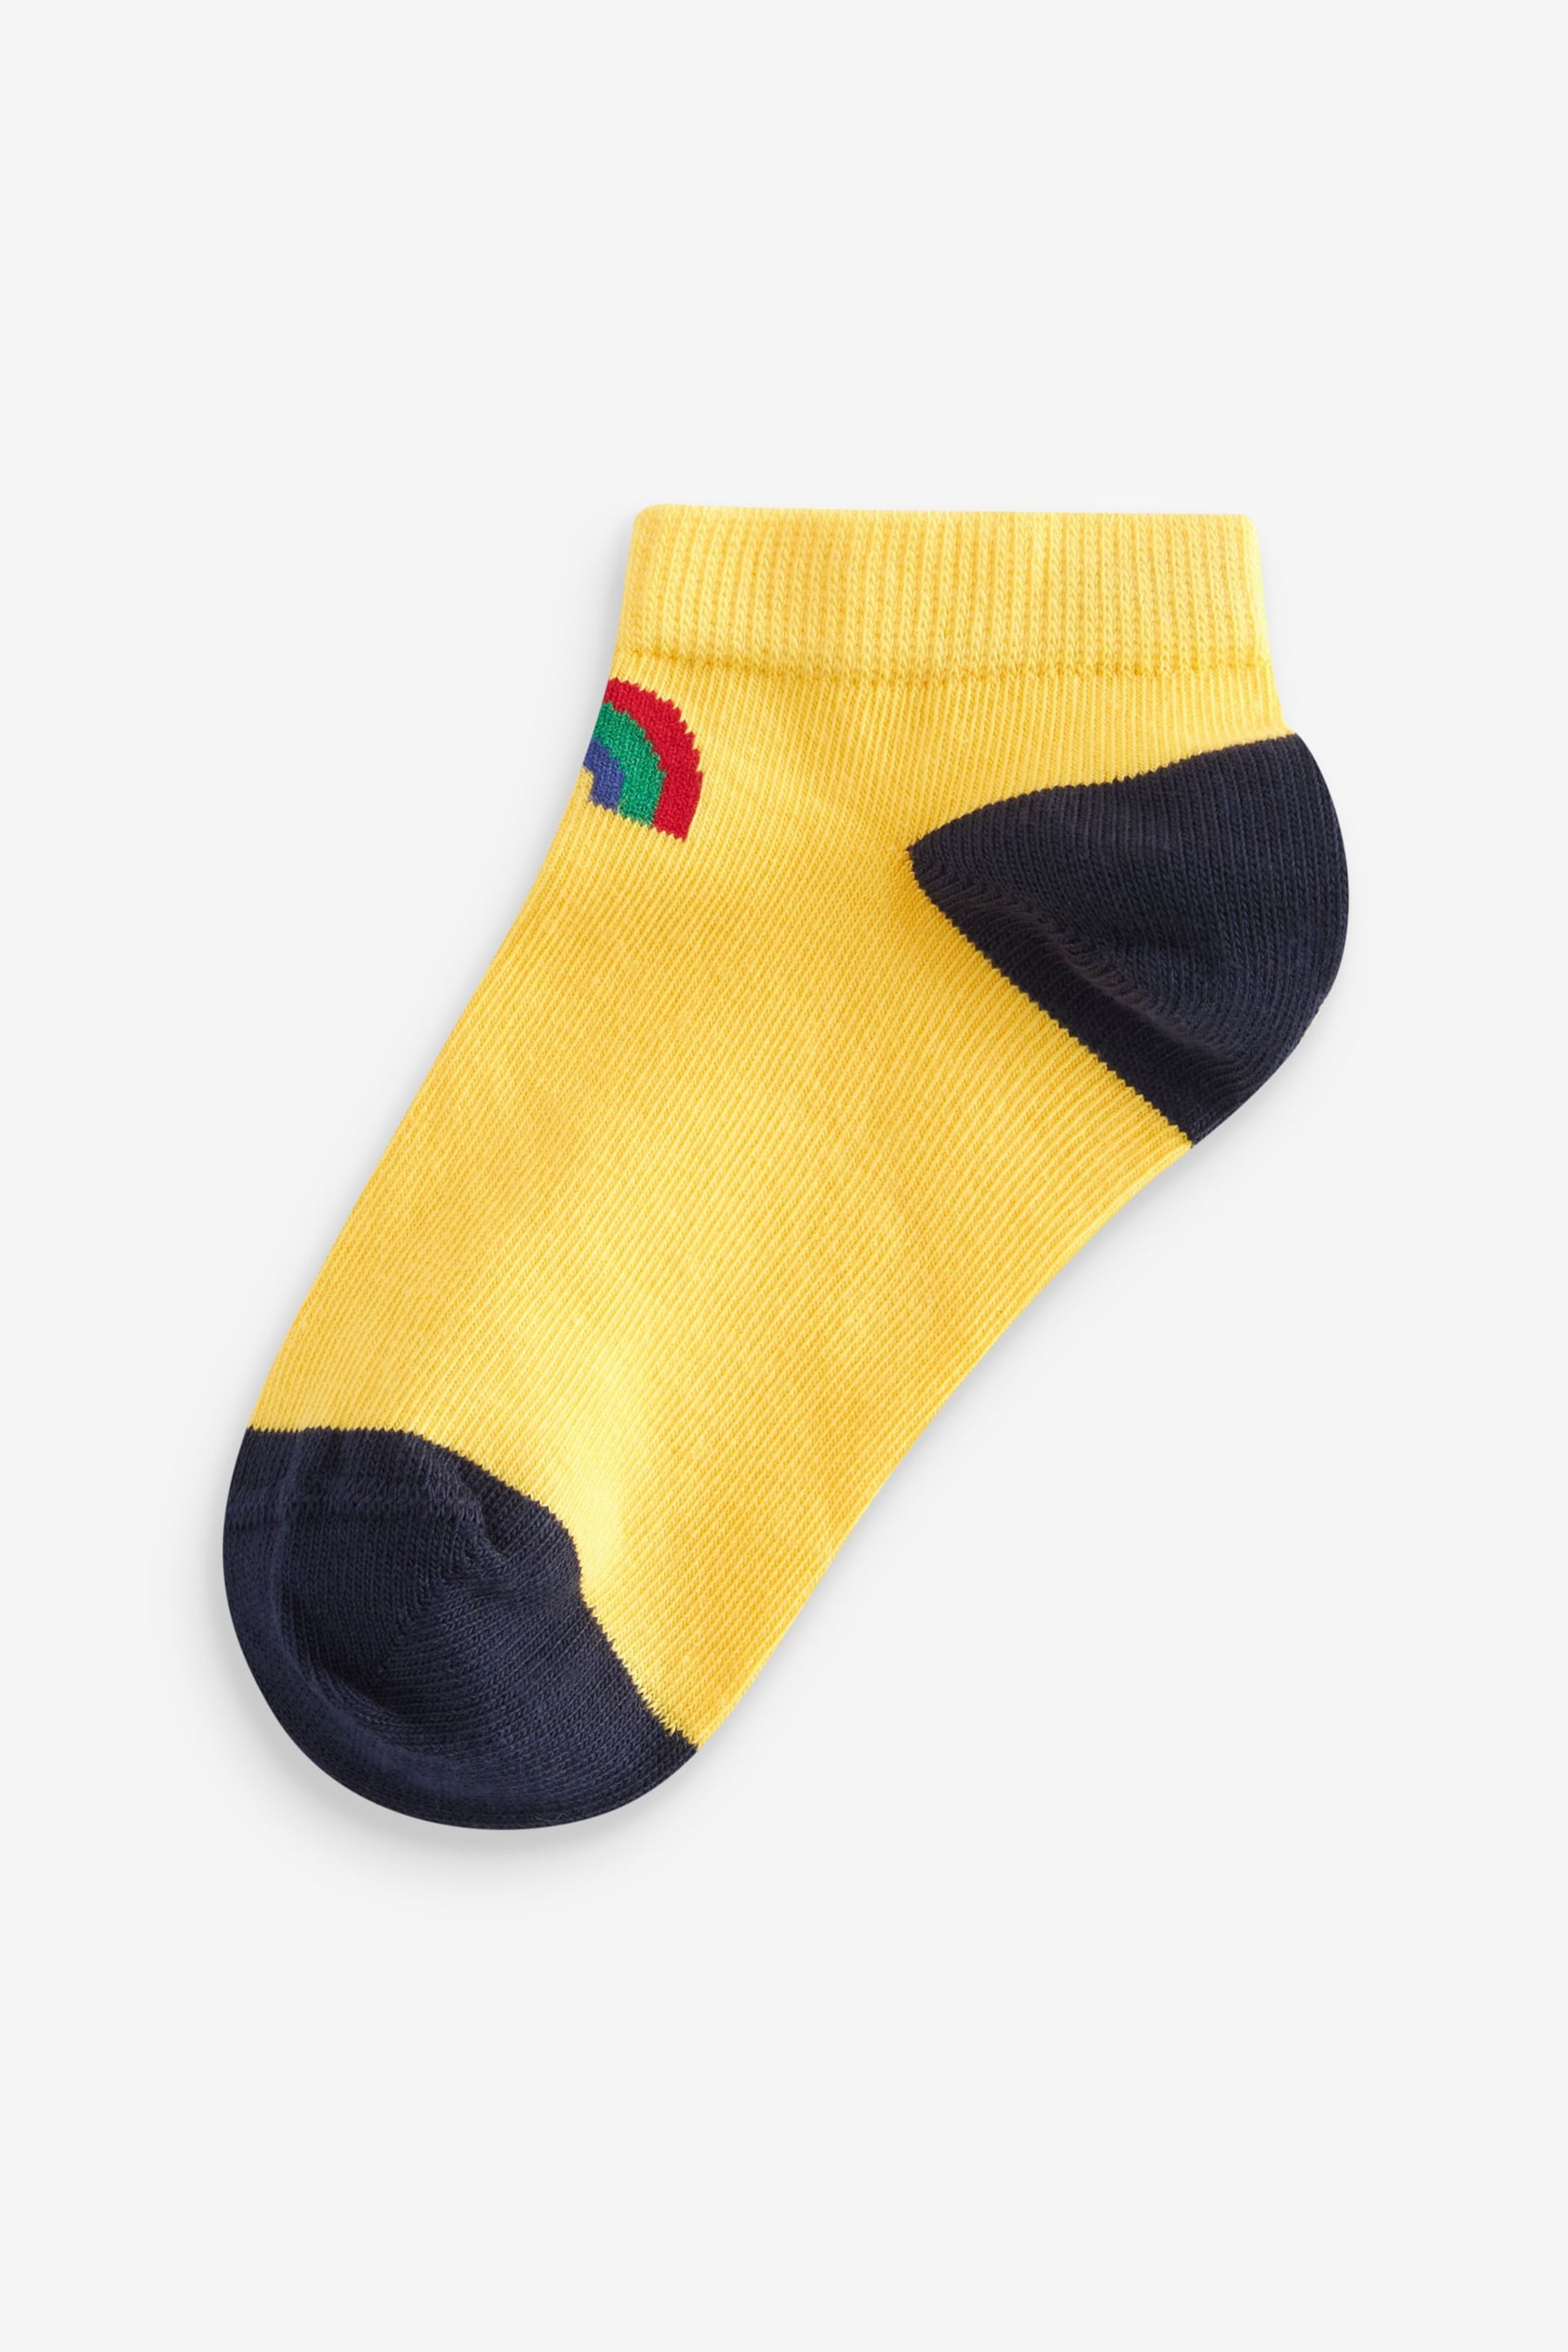 Bright Rainbows/Stripe Cotton Rich Trainers Socks 5 Pack - Image 3 of 6